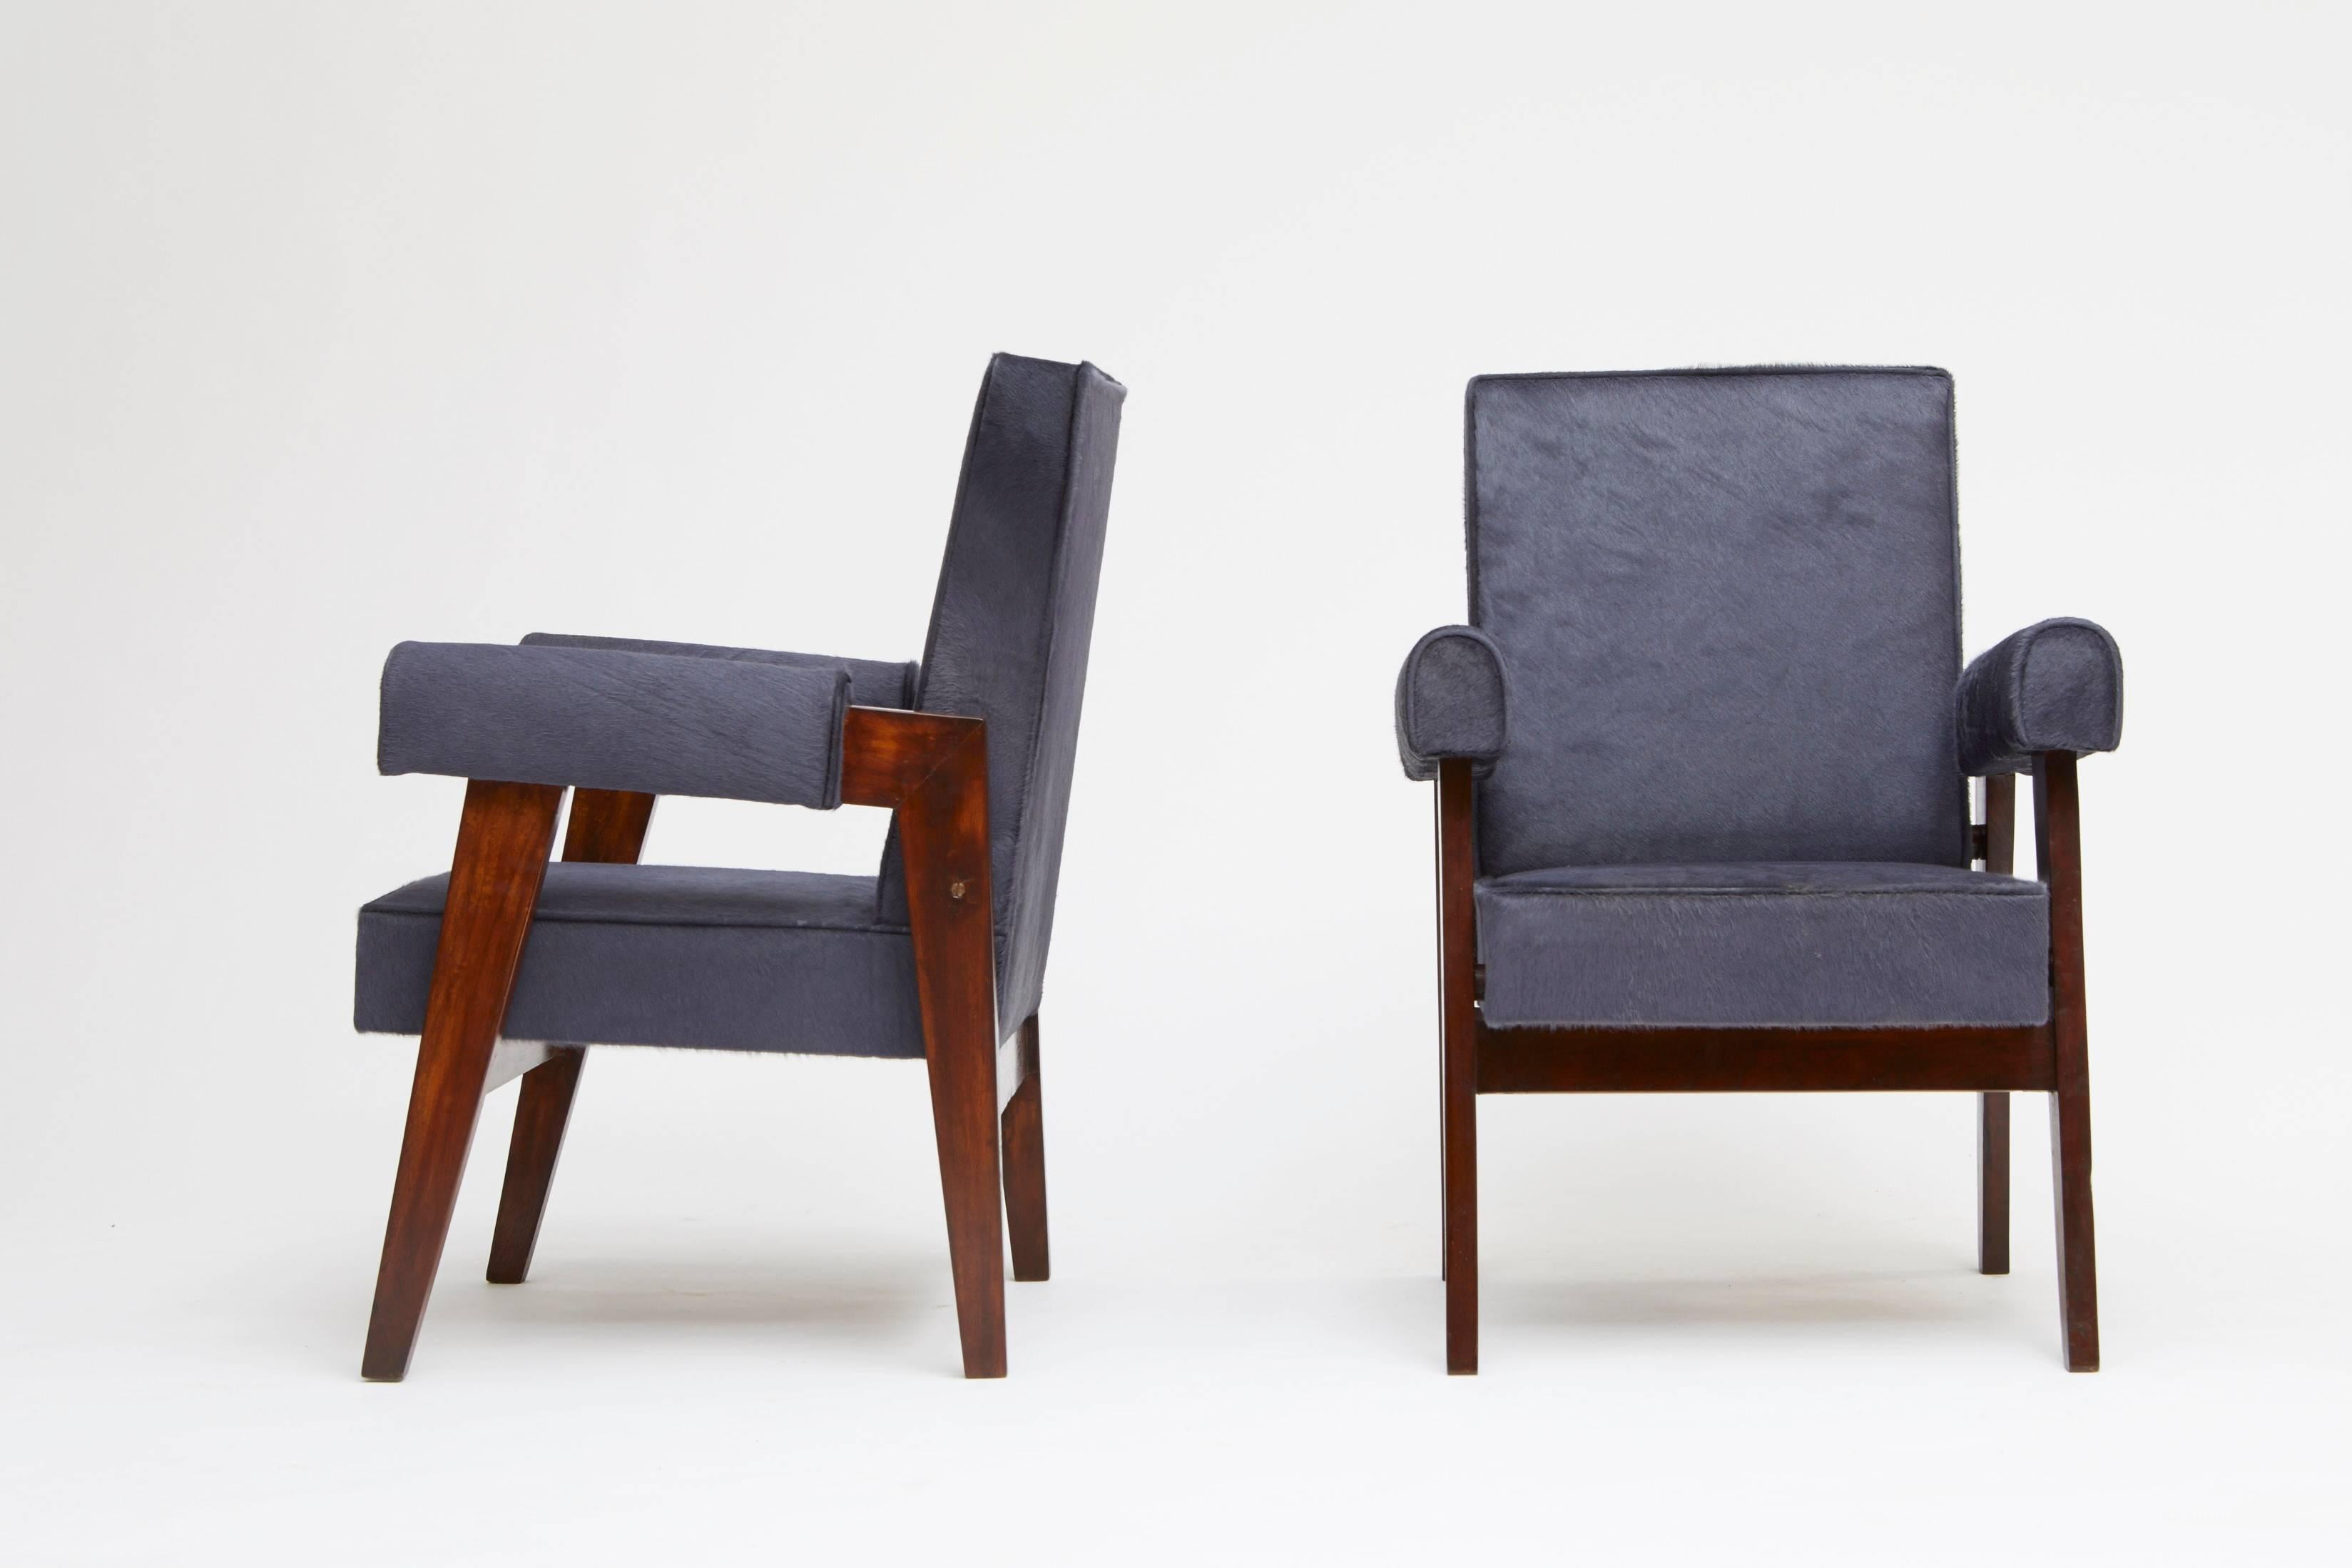 Pierre Jeanneret, pair of Advocate and Press chairs
Provenance: High Court of Chandigarh
circa 1955-1956.